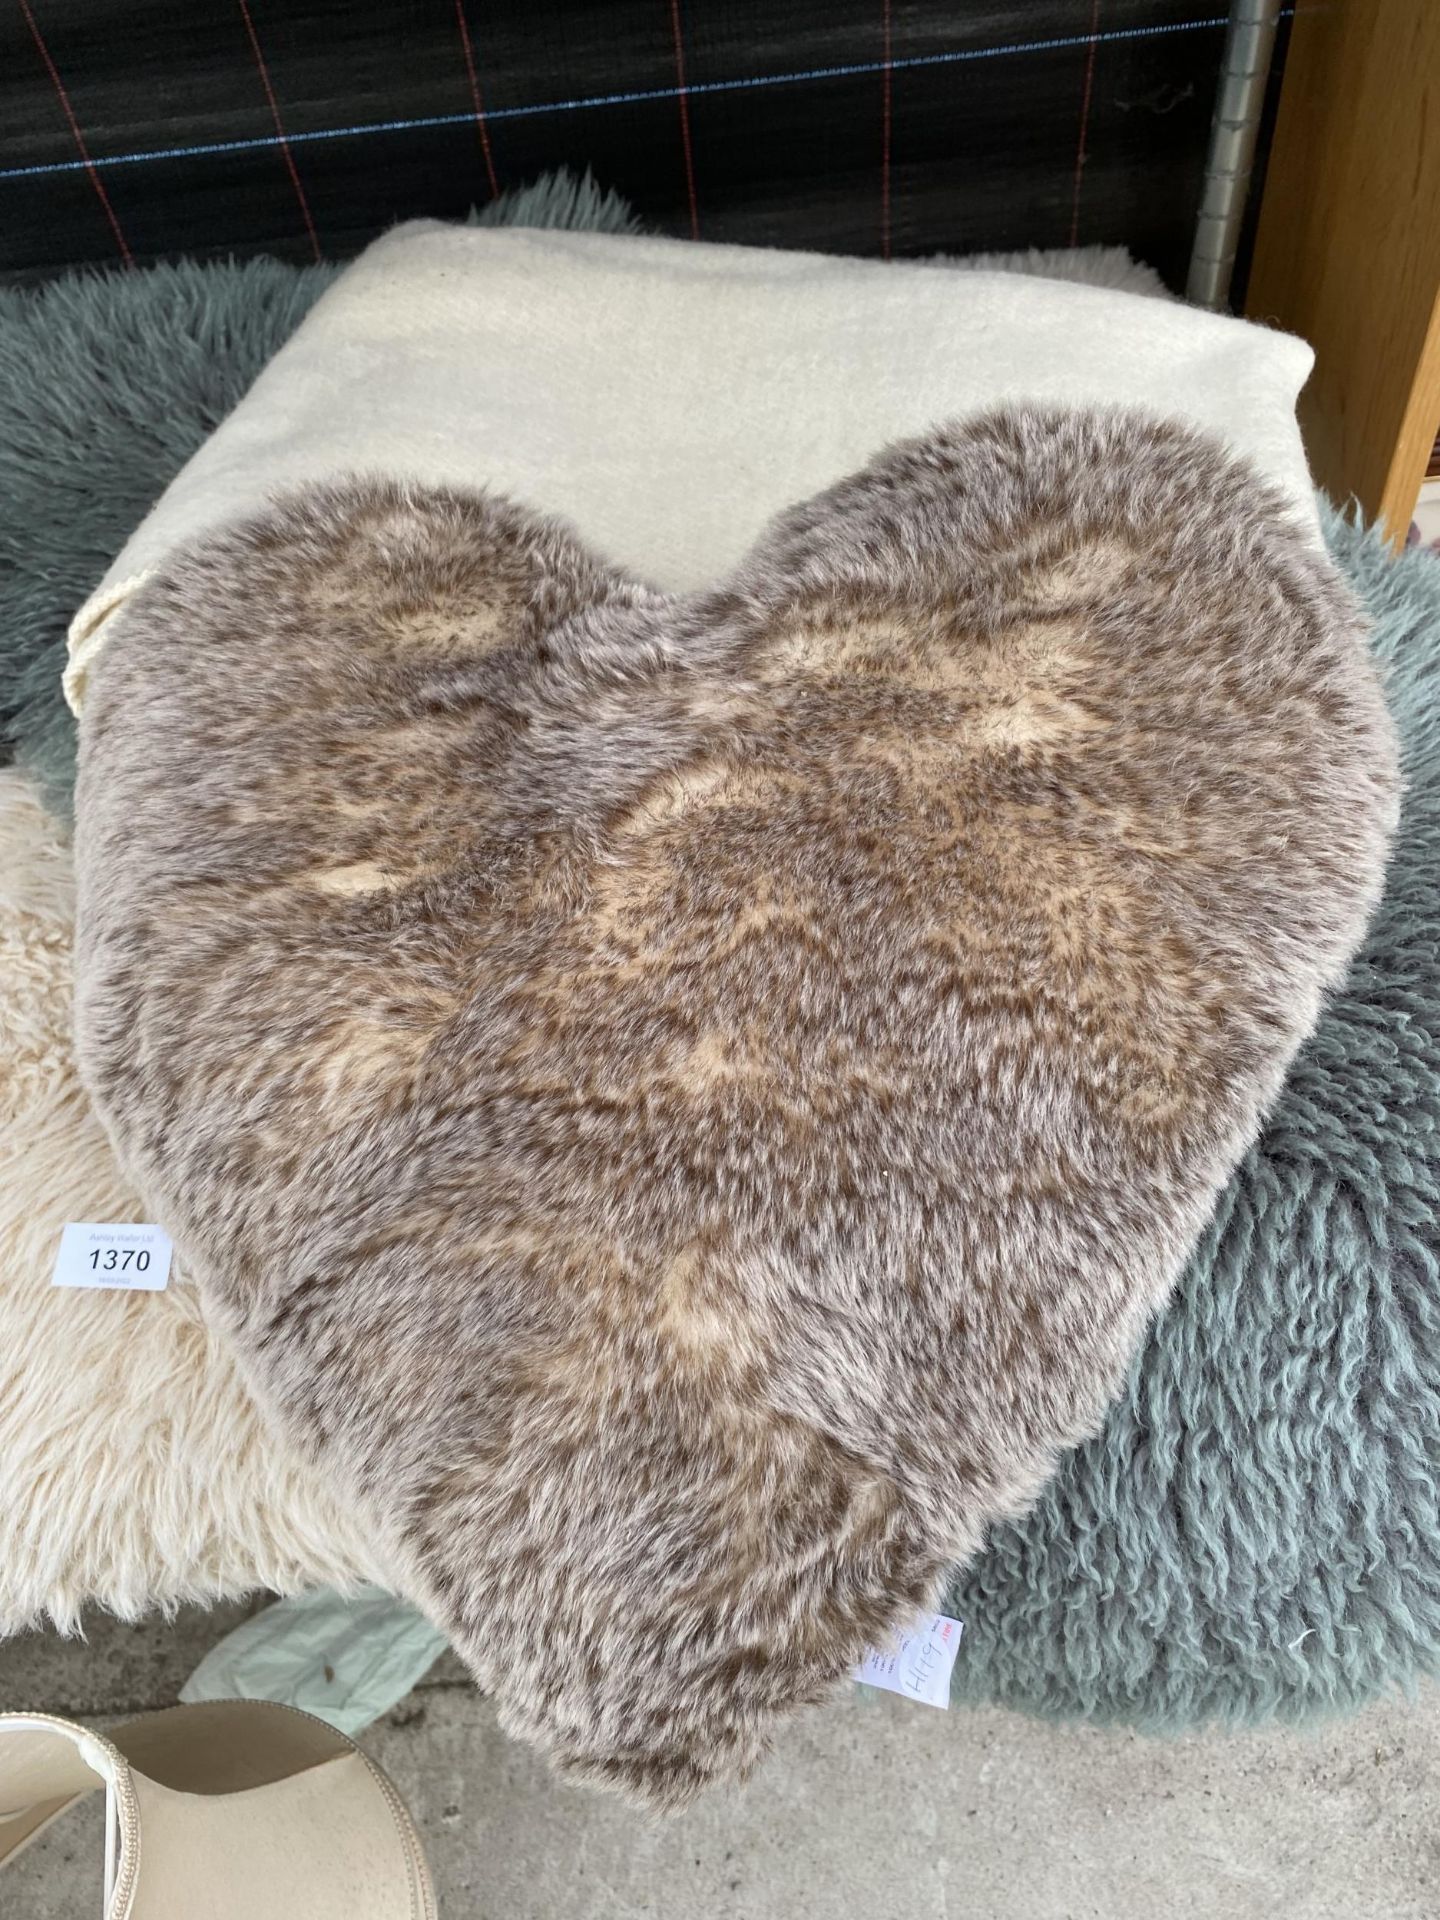 A NEXT FLOOR CUSHION, A WOOLLEN THROW AND A SHEEP SKIN RUG - Image 2 of 6